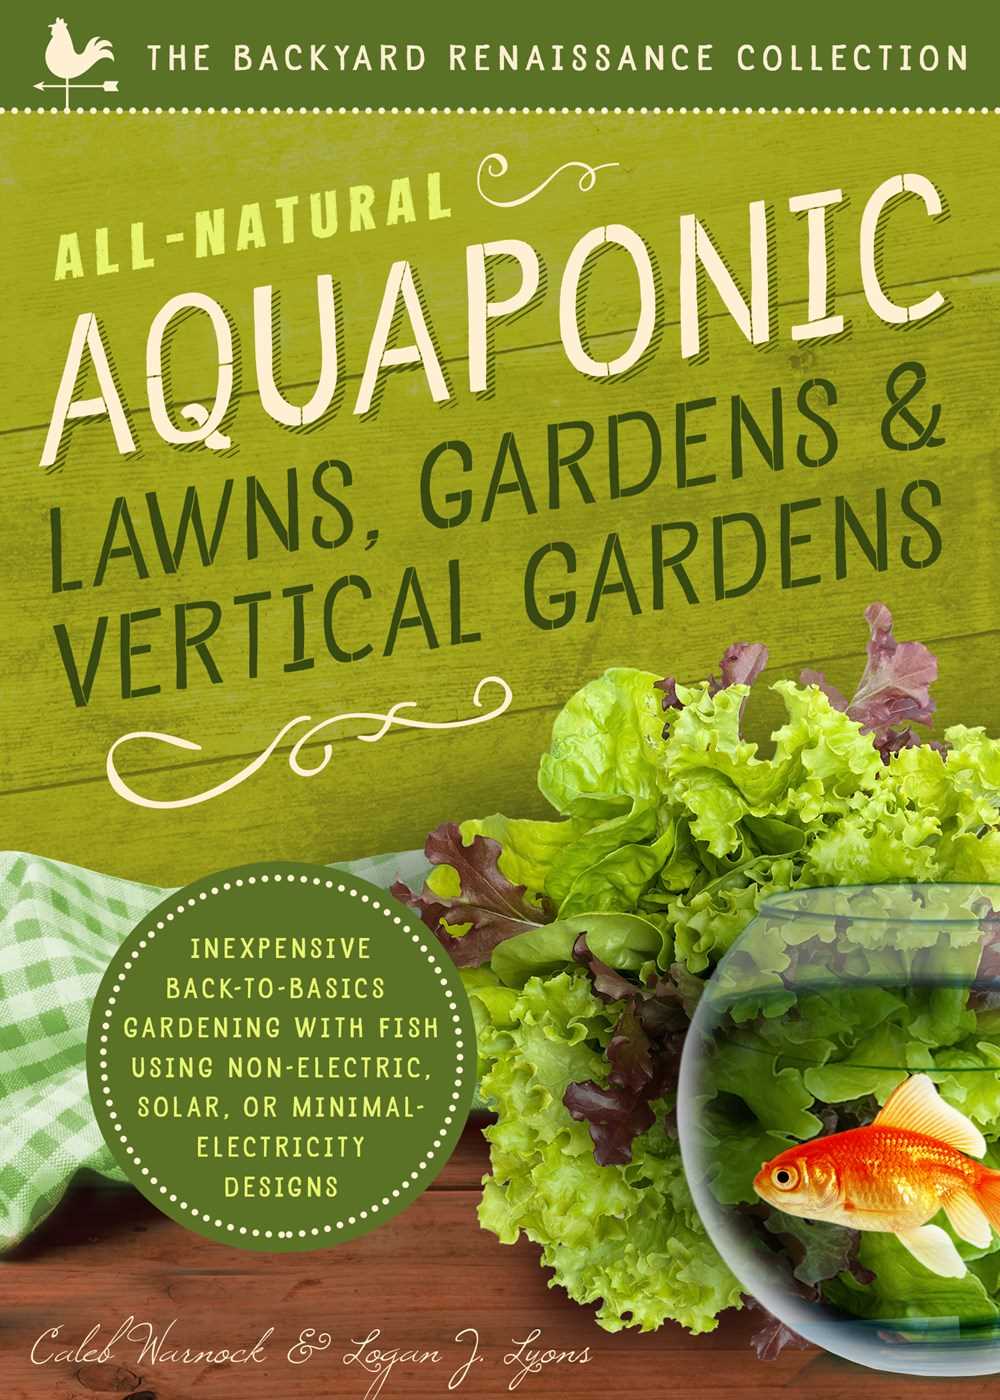 All-Natural Aquaponic Lawns, Gardens &amp; Vertical Gardens